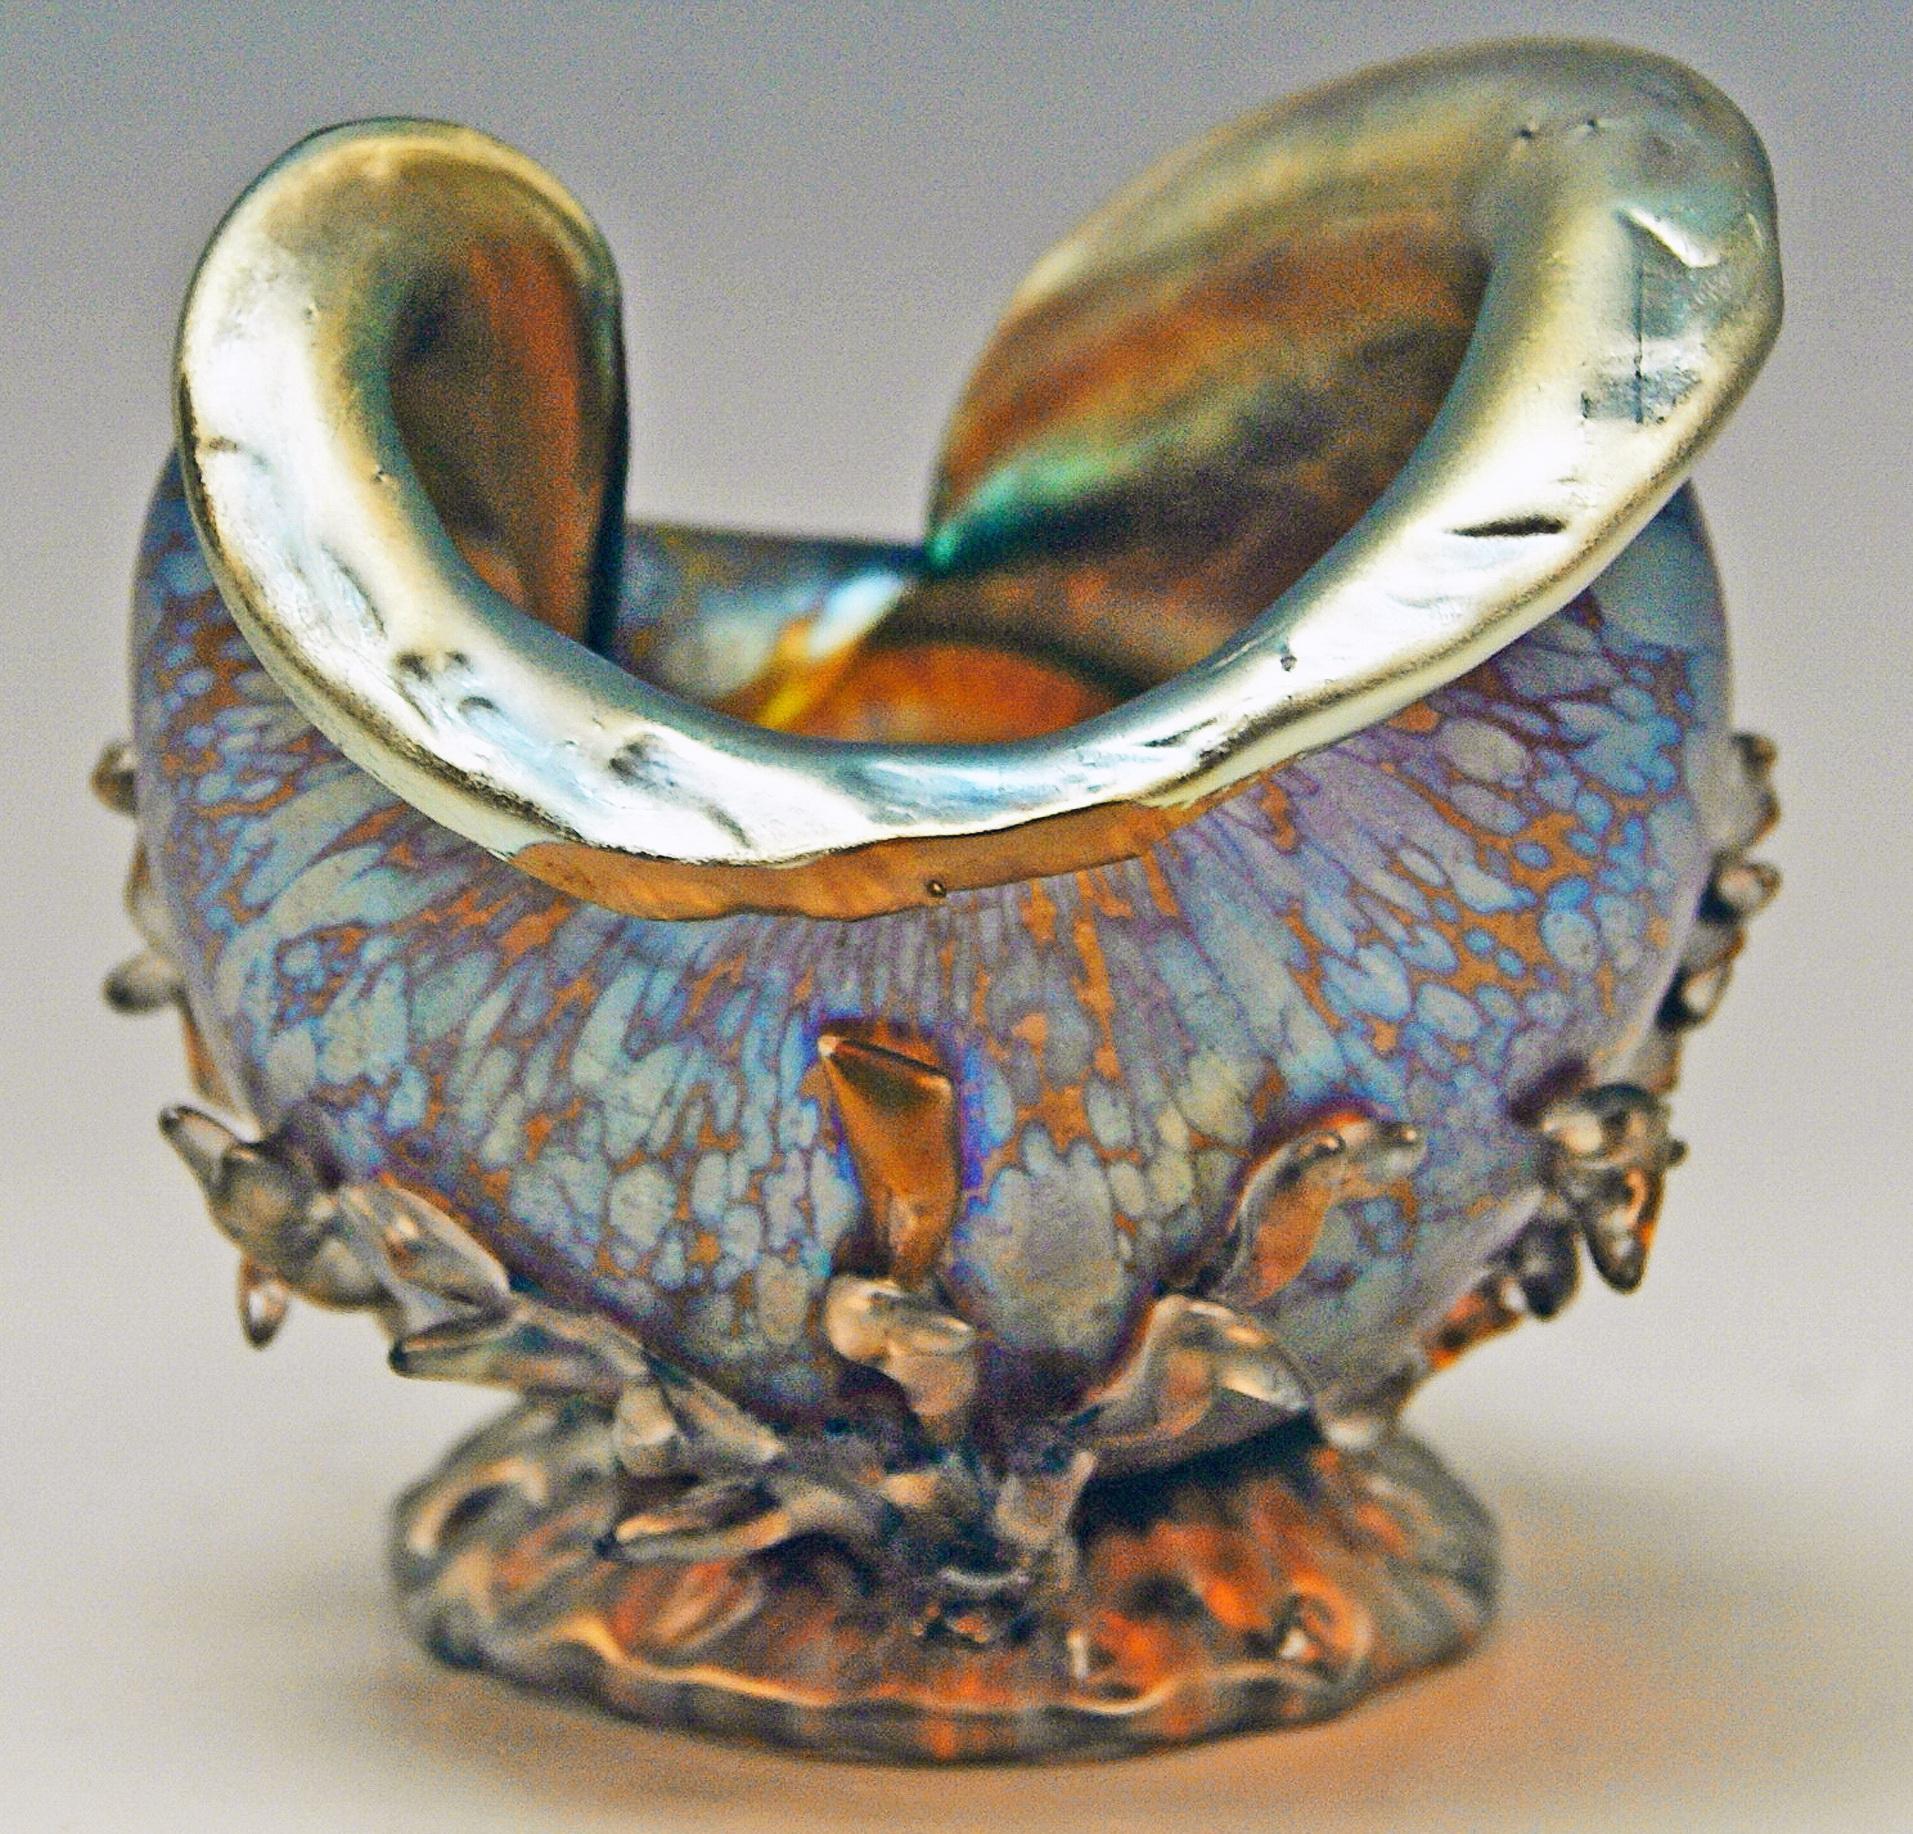 Superb Art Nouveau ornamental vase shaped as snail.

Made by Loetz, Klostermuehle (Bohemia), circa 1900.
Decor: Candia Papillon

It is a nicest Loetz Vase of this very special form type of a snail:
Blow-molded as well as colorless glass with